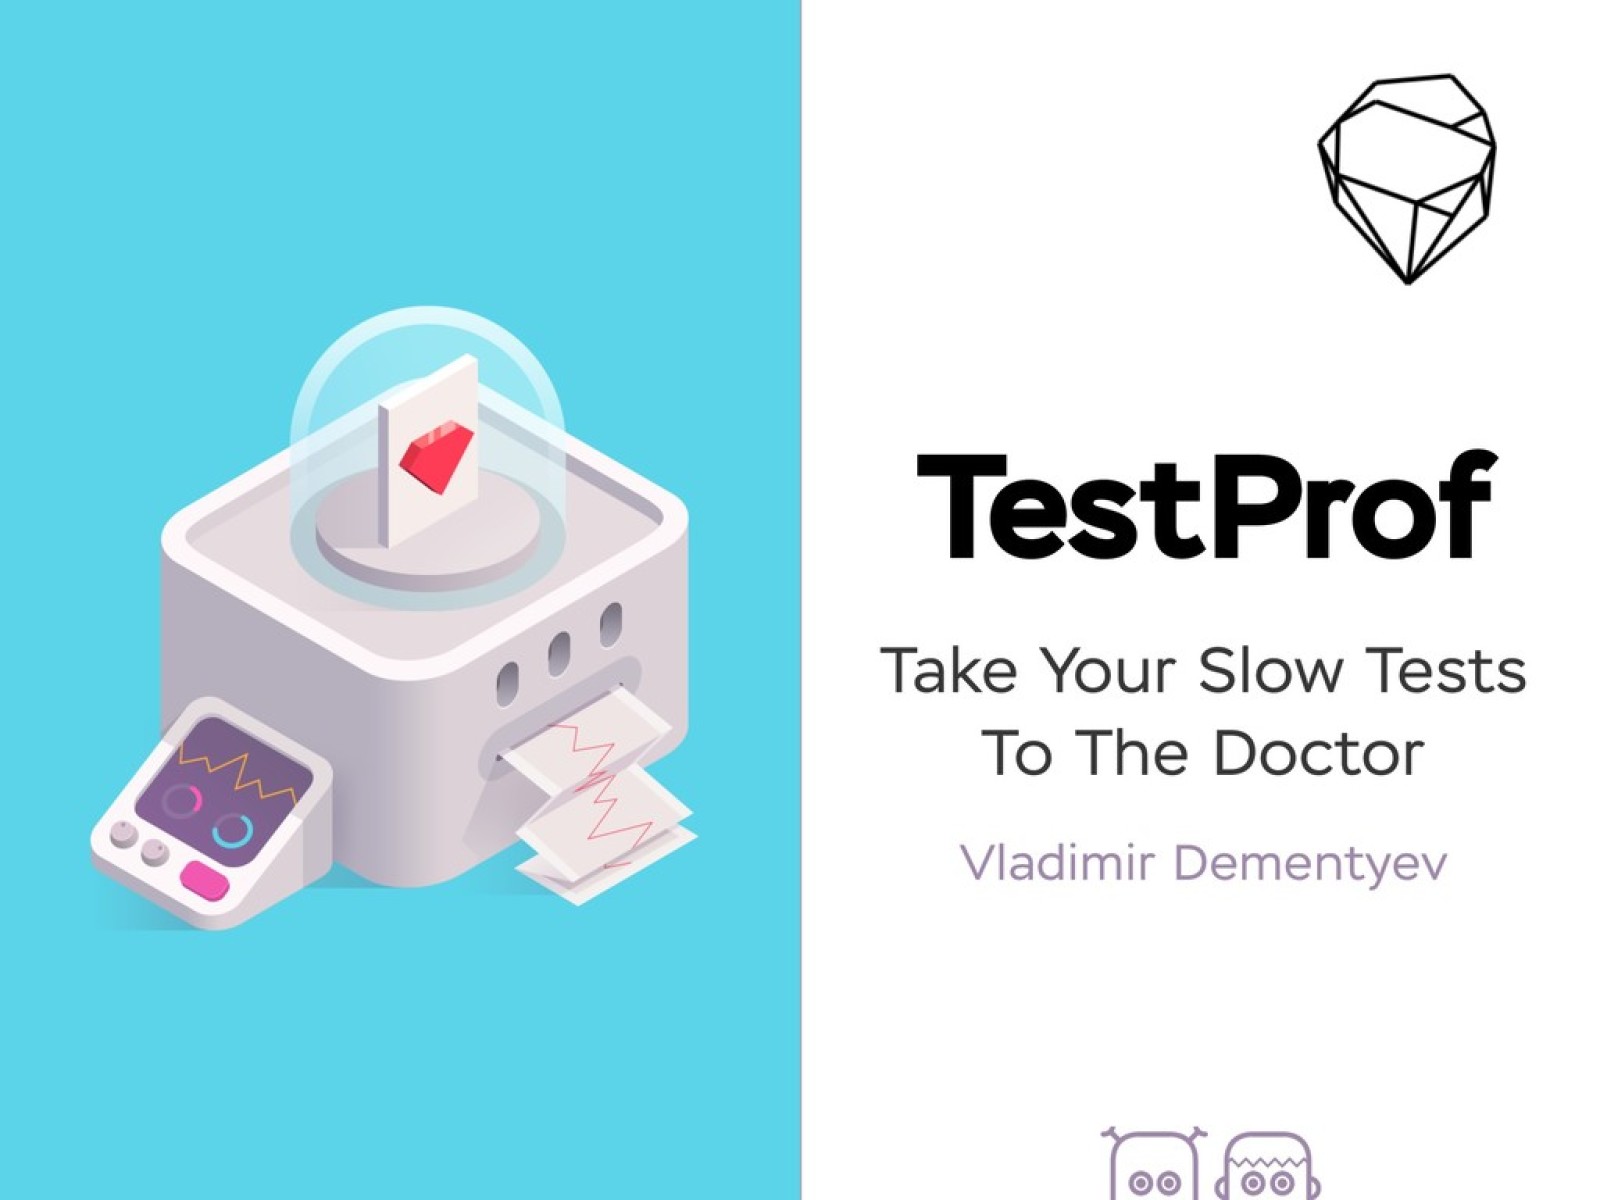 Take your slow tests to the doctor